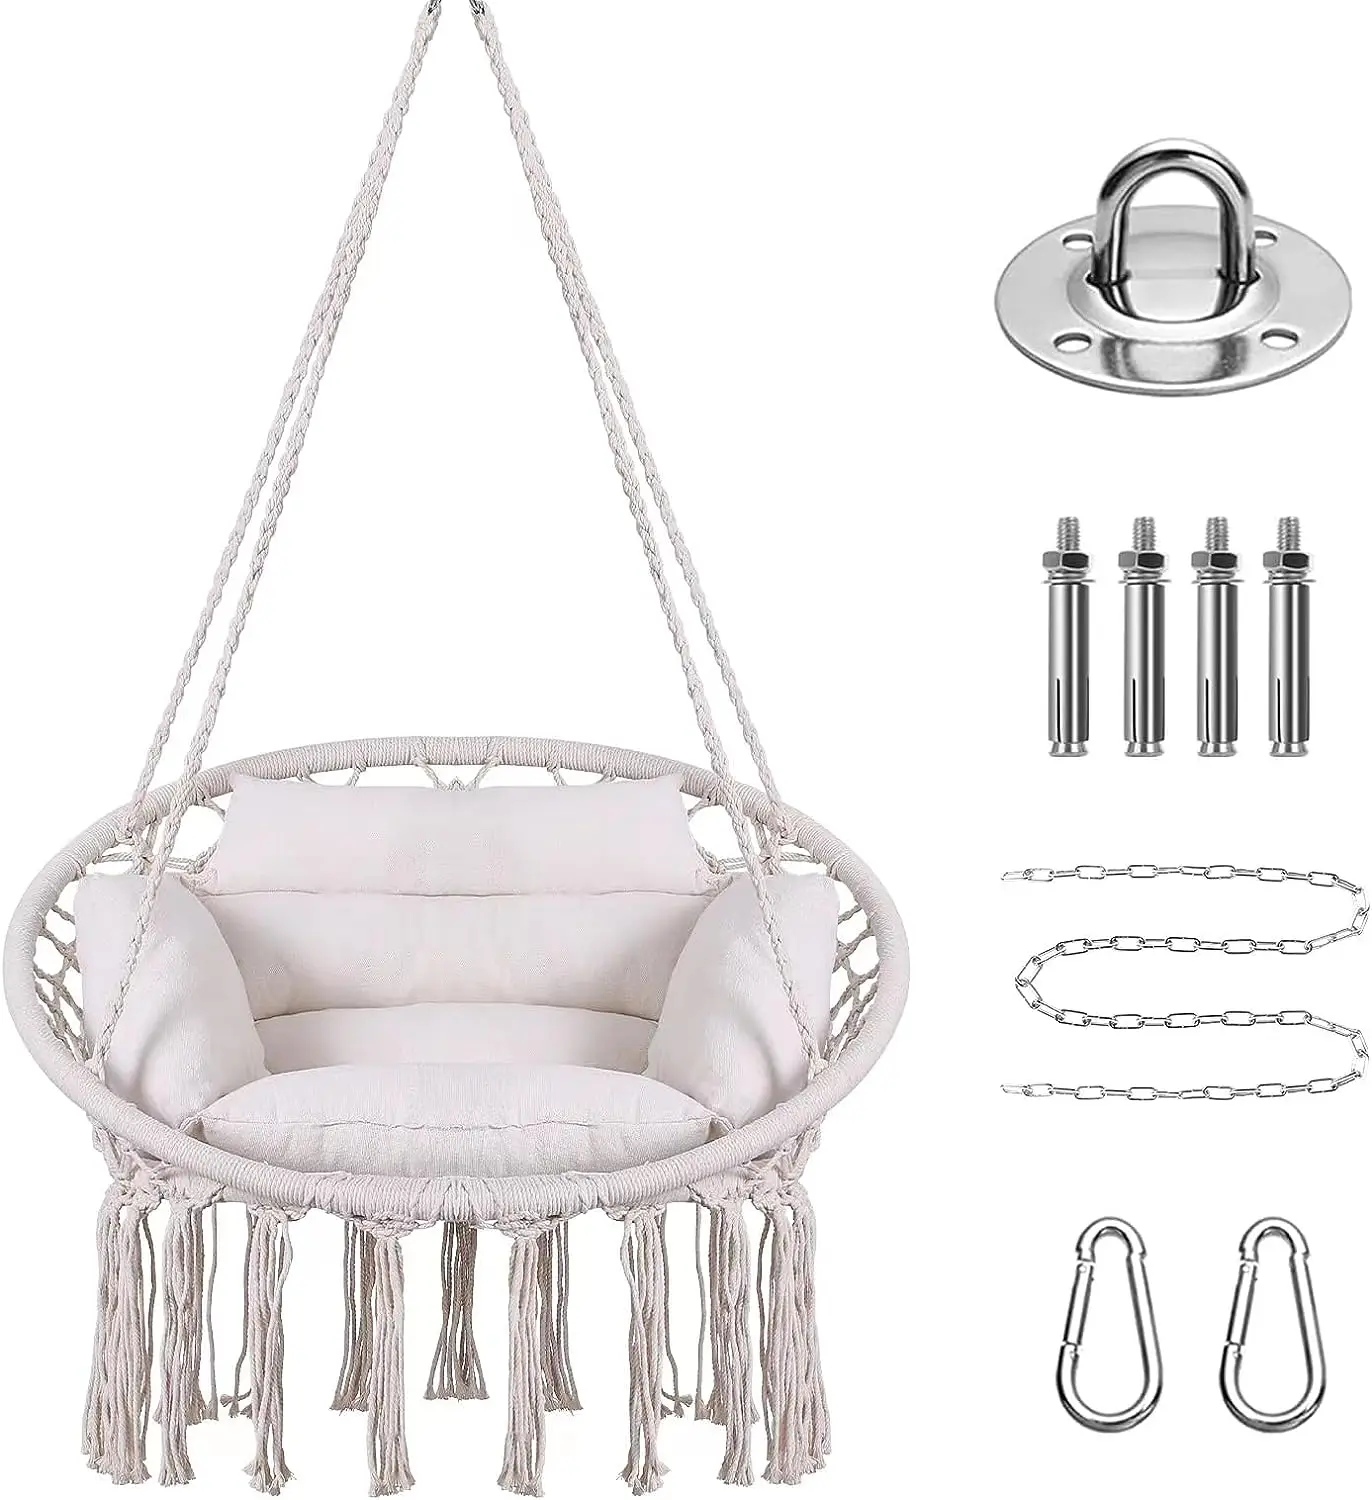 

Chair, Macrame Hanging Swing Chairs with Cushion and Hardware Kit, Adult Swings for Outside,,Balcony, Bedroom (Gray)